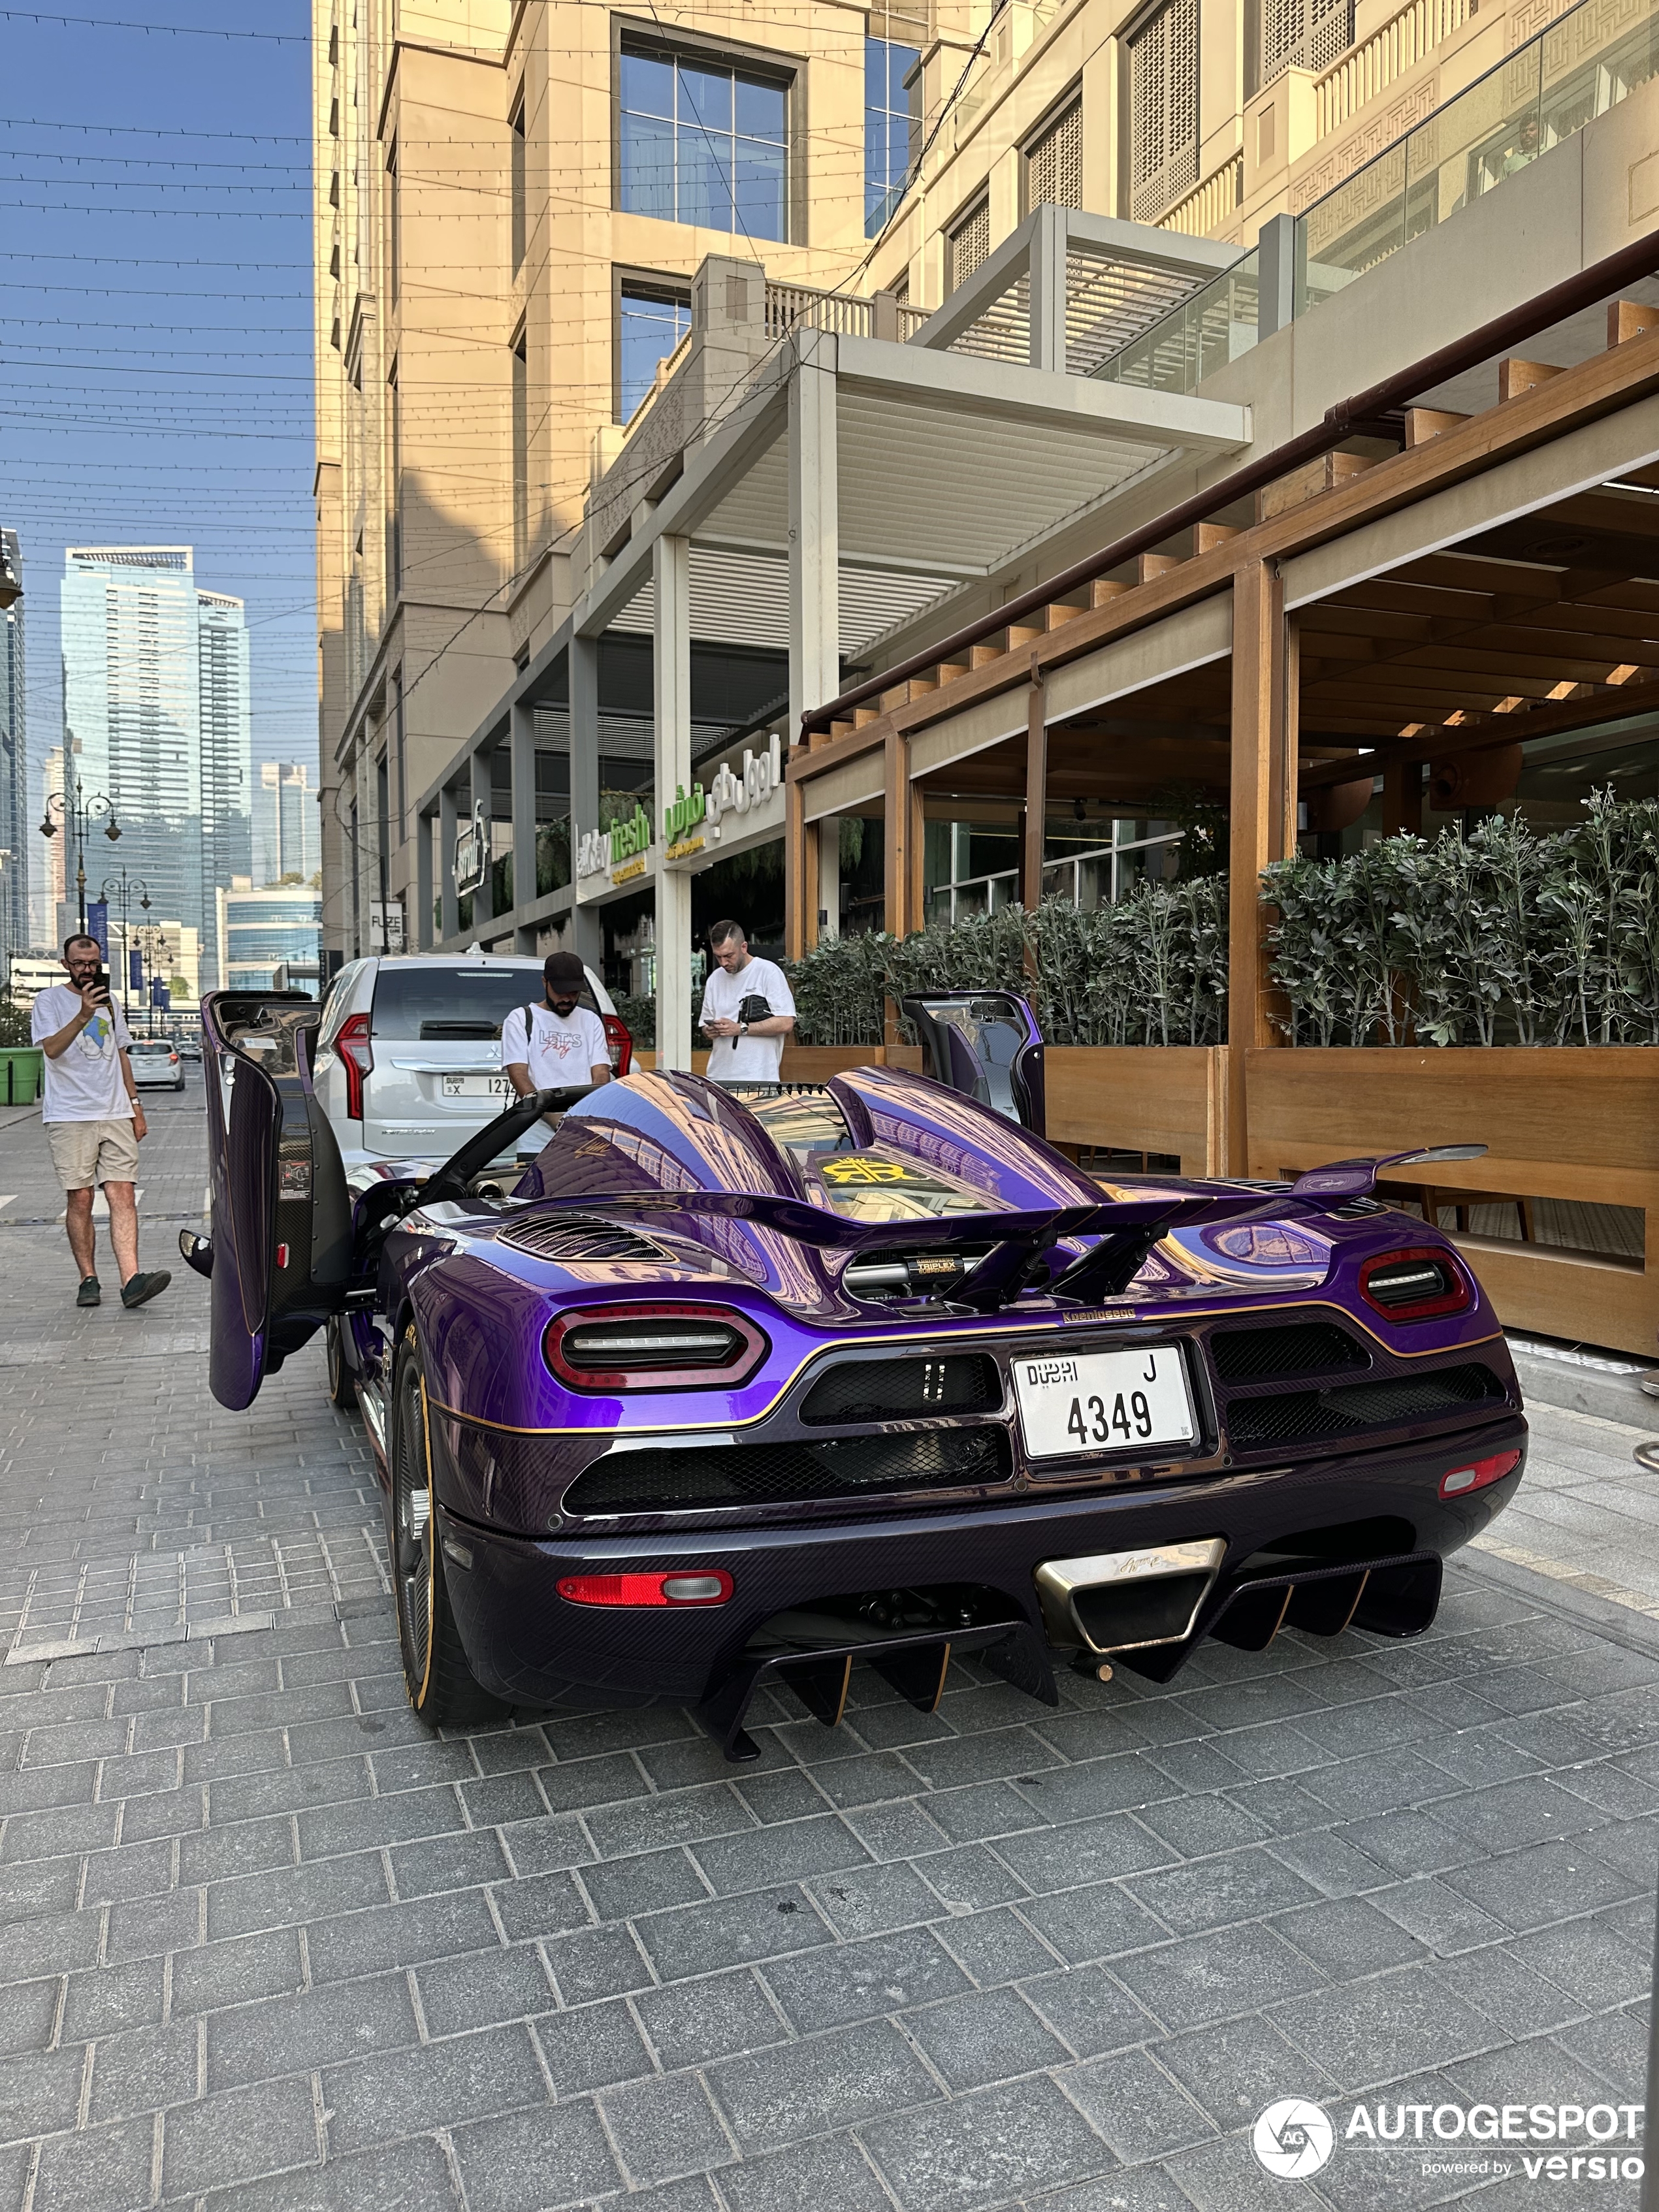 Another Purple Hypercar Emerges, This Time in Dubai.